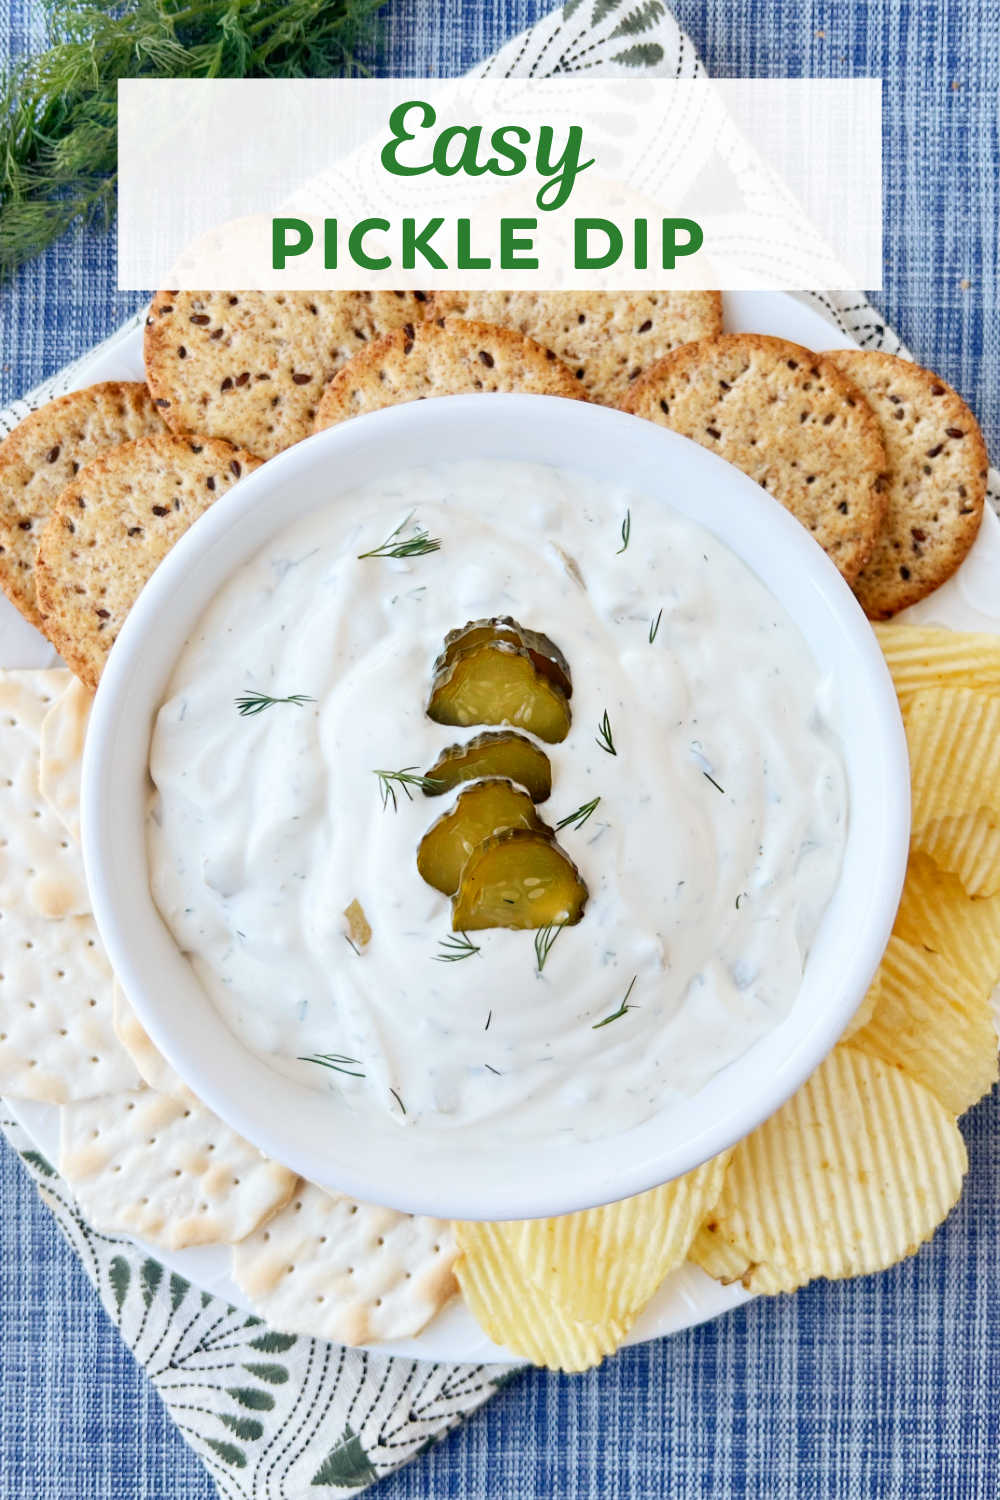 Dill Pickle Dip is a delicious appetizer made with crunchy pickles in a creamy base. Pickle lovers love this easy dill pickle dip recipe, and it's perfect for game day, parties or any family gathering. via @meamel